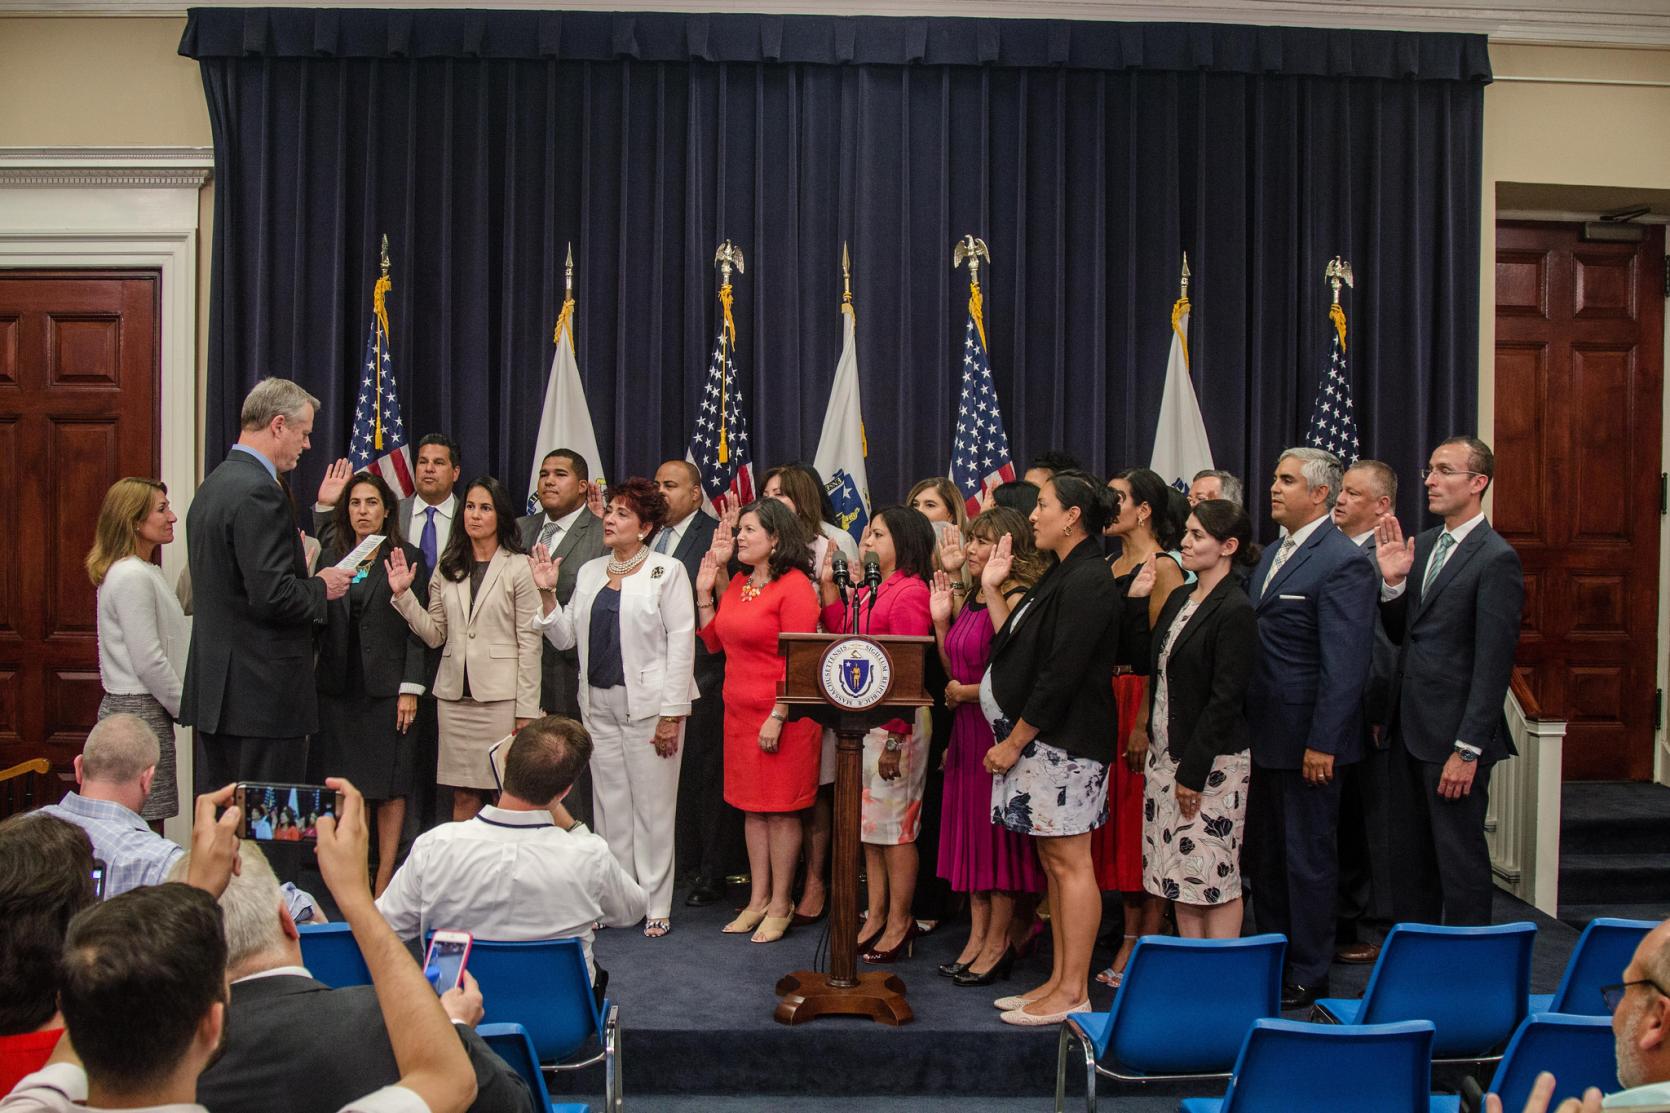 Governor Baker swears in the Latino Advisory Commission